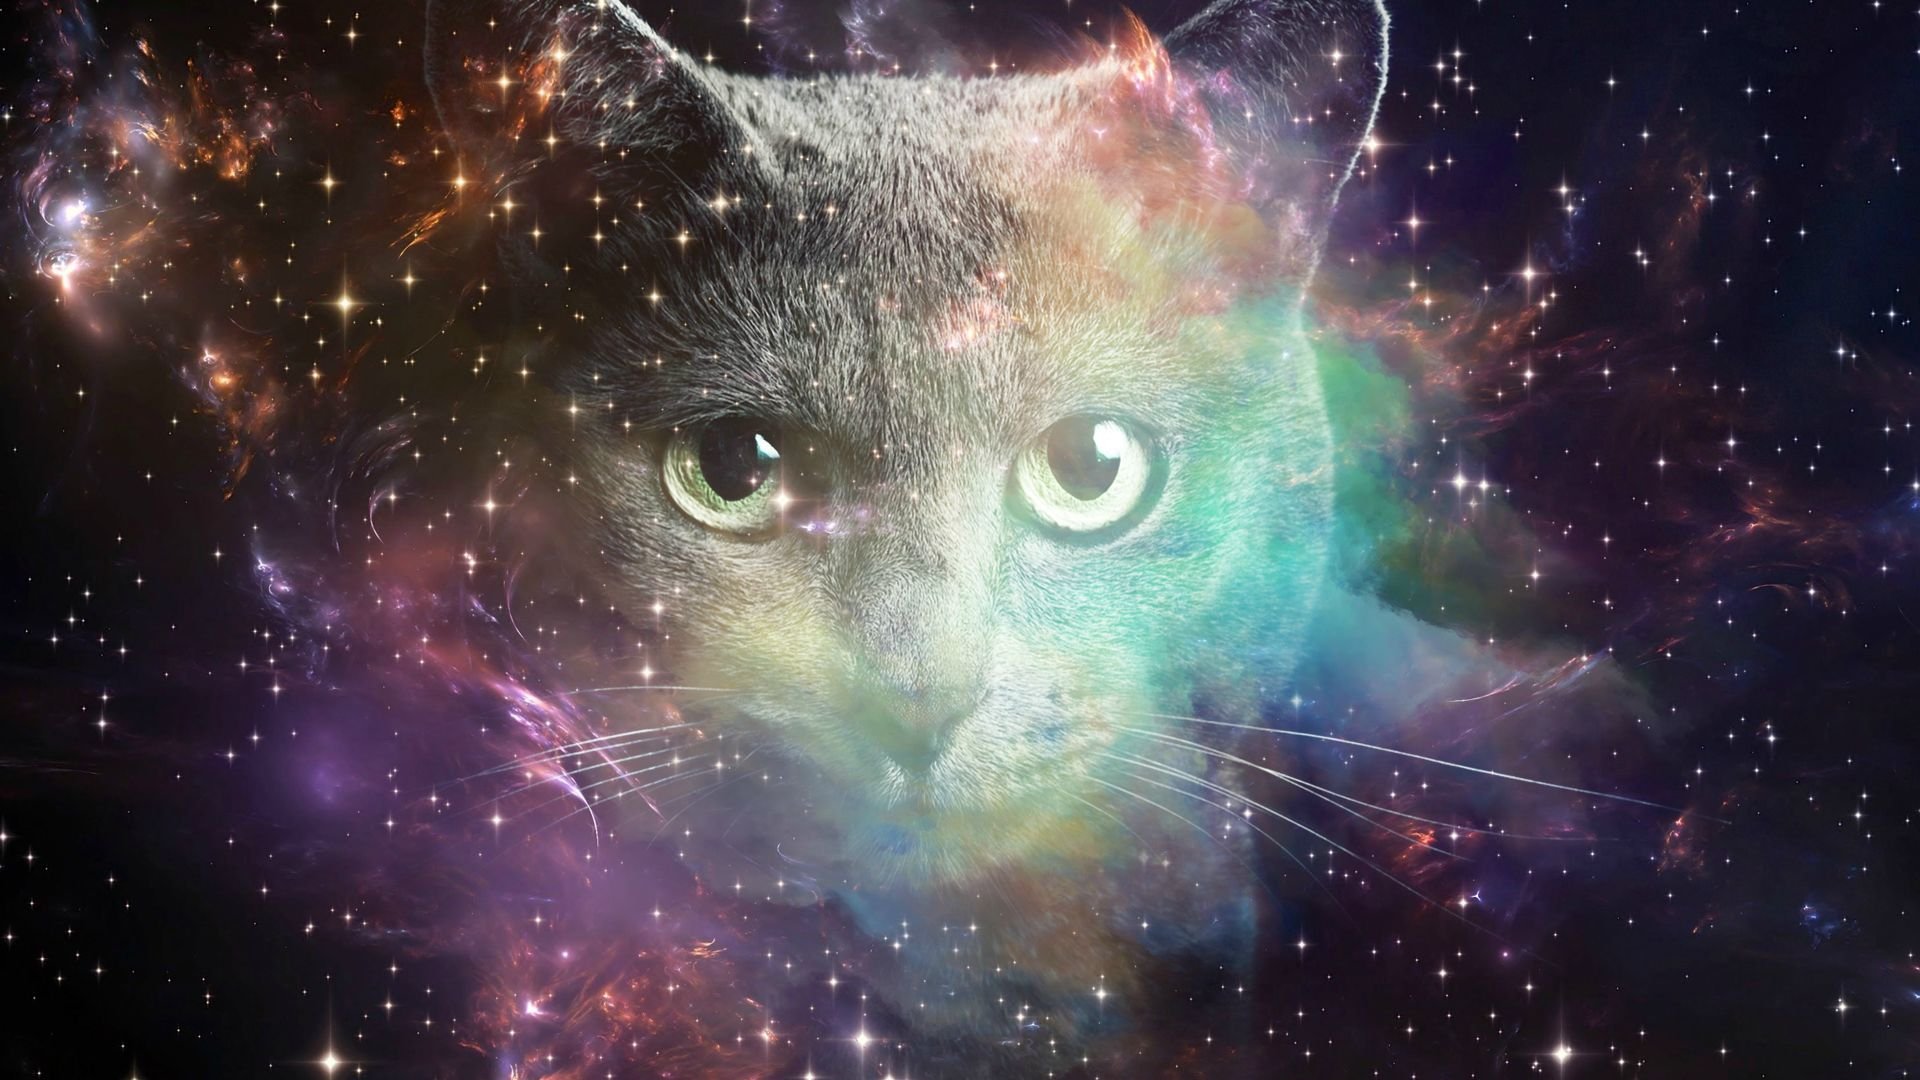 space cat wallpaper,nebula,outer space,galaxy,universe,space